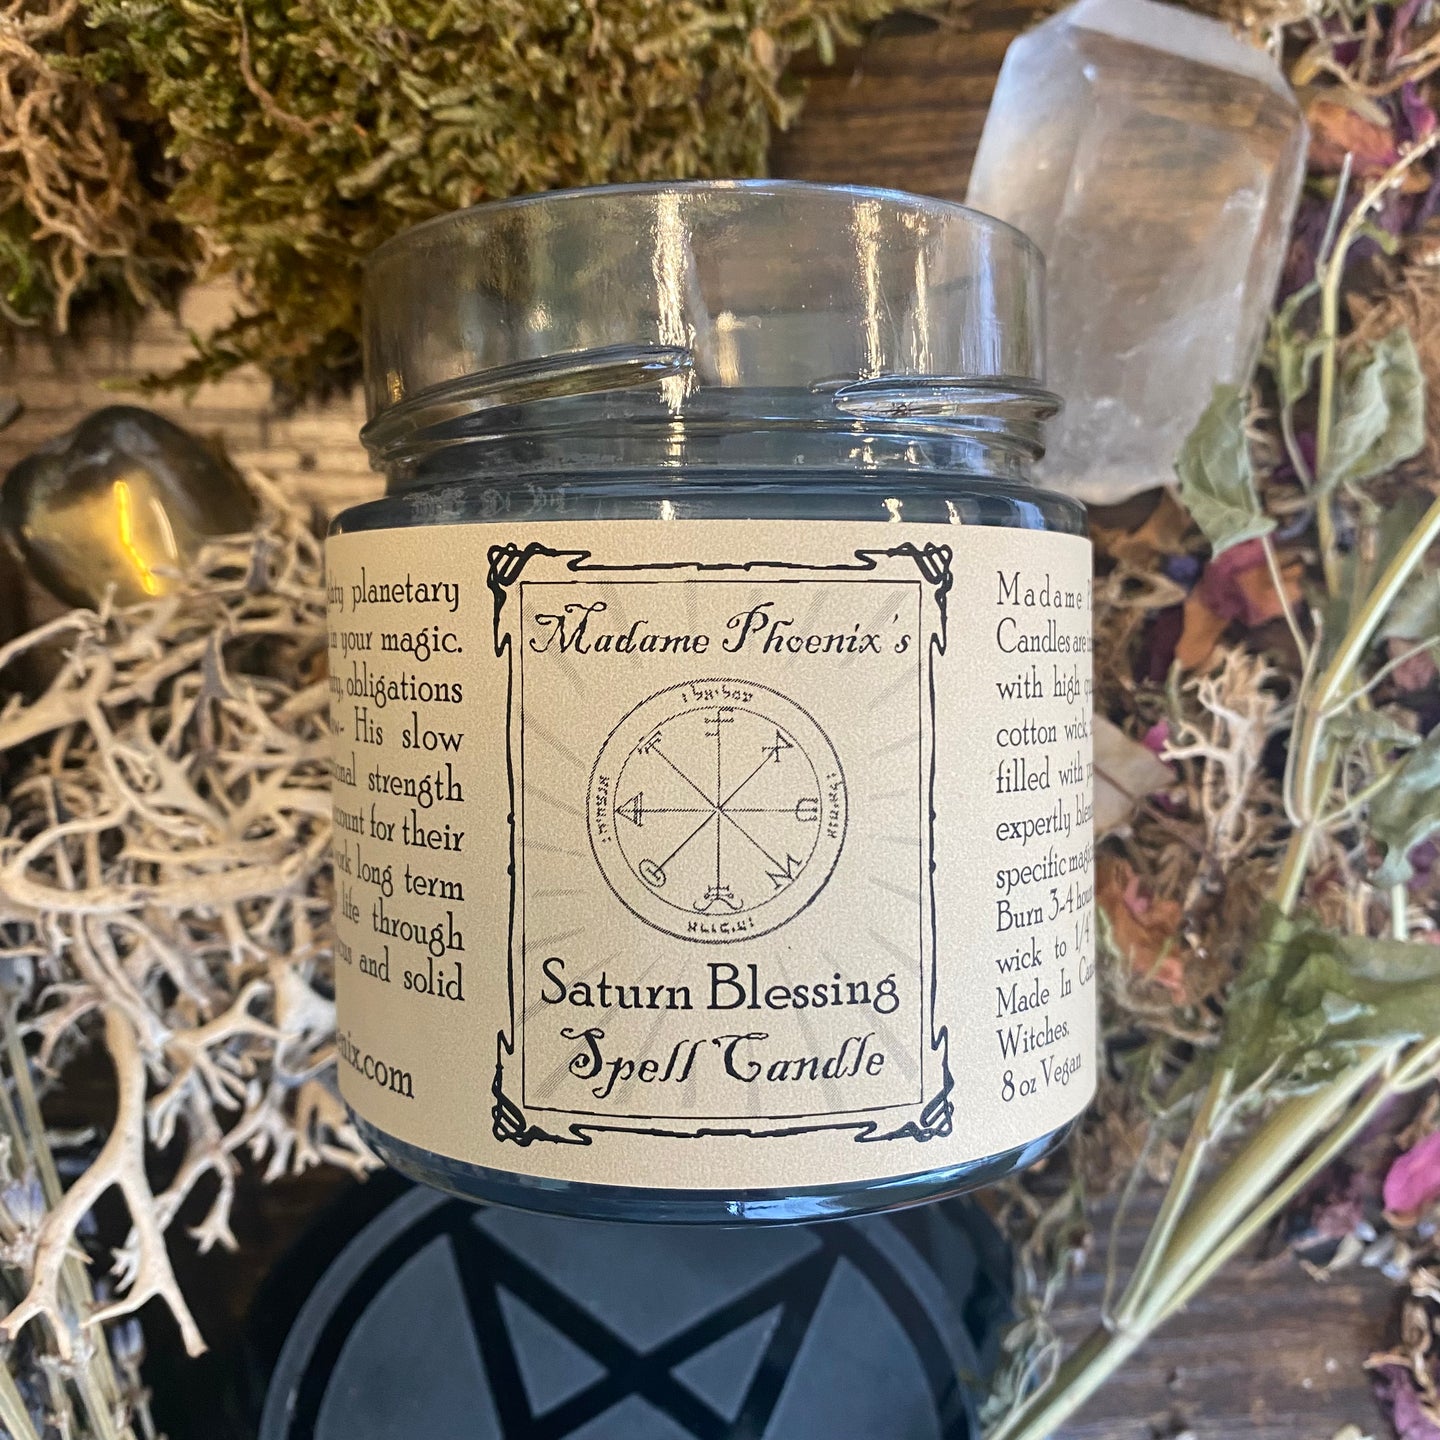 Planetary Magic Saturn Spell Candle